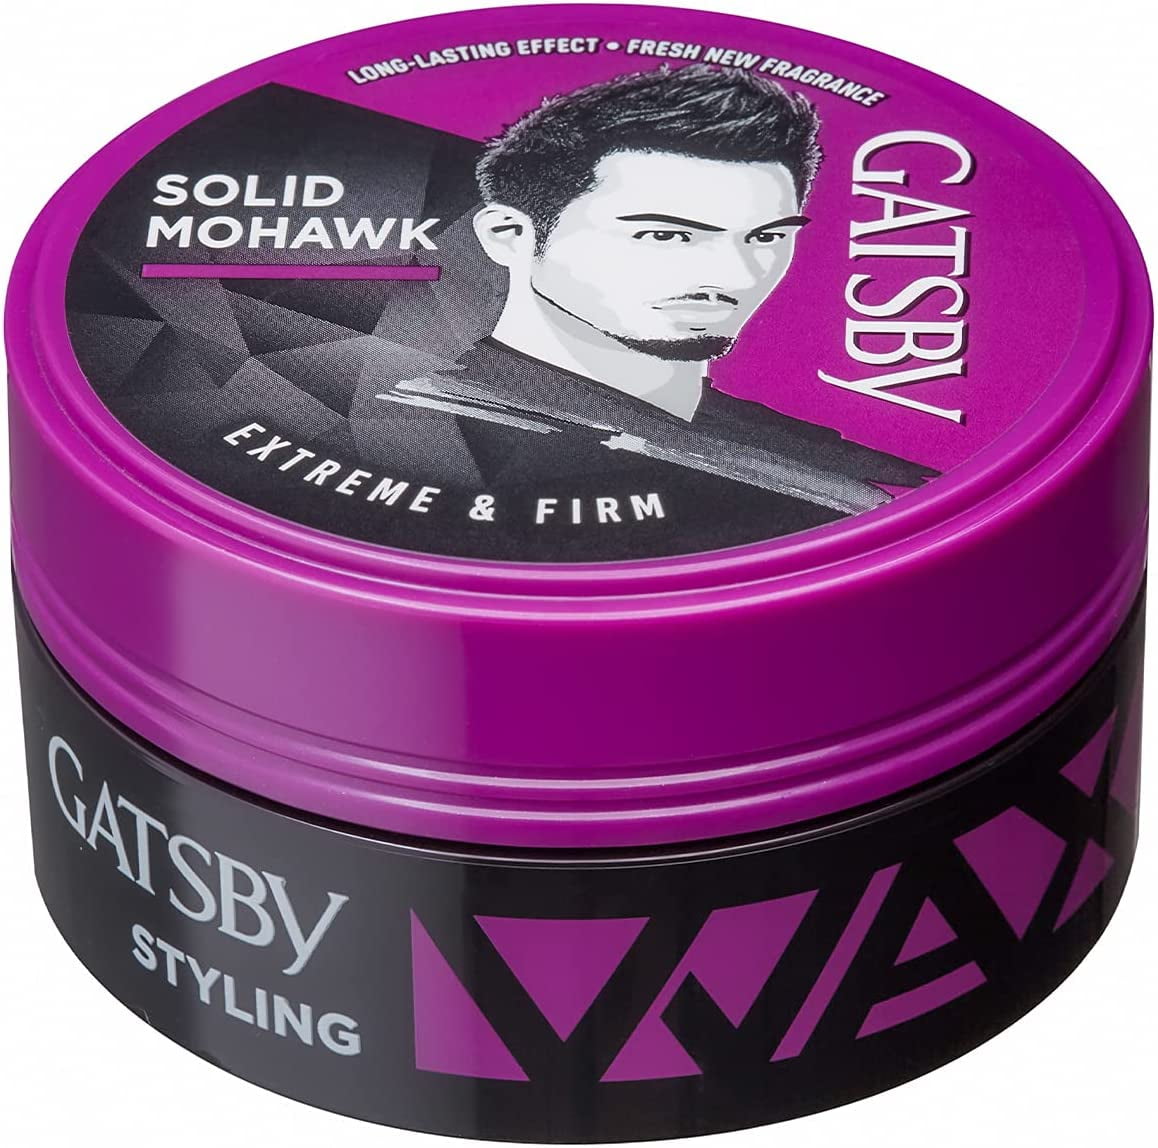 Gatsby Hair Styling Wax Mohawk Firmed Extreme & Firm - 75g 